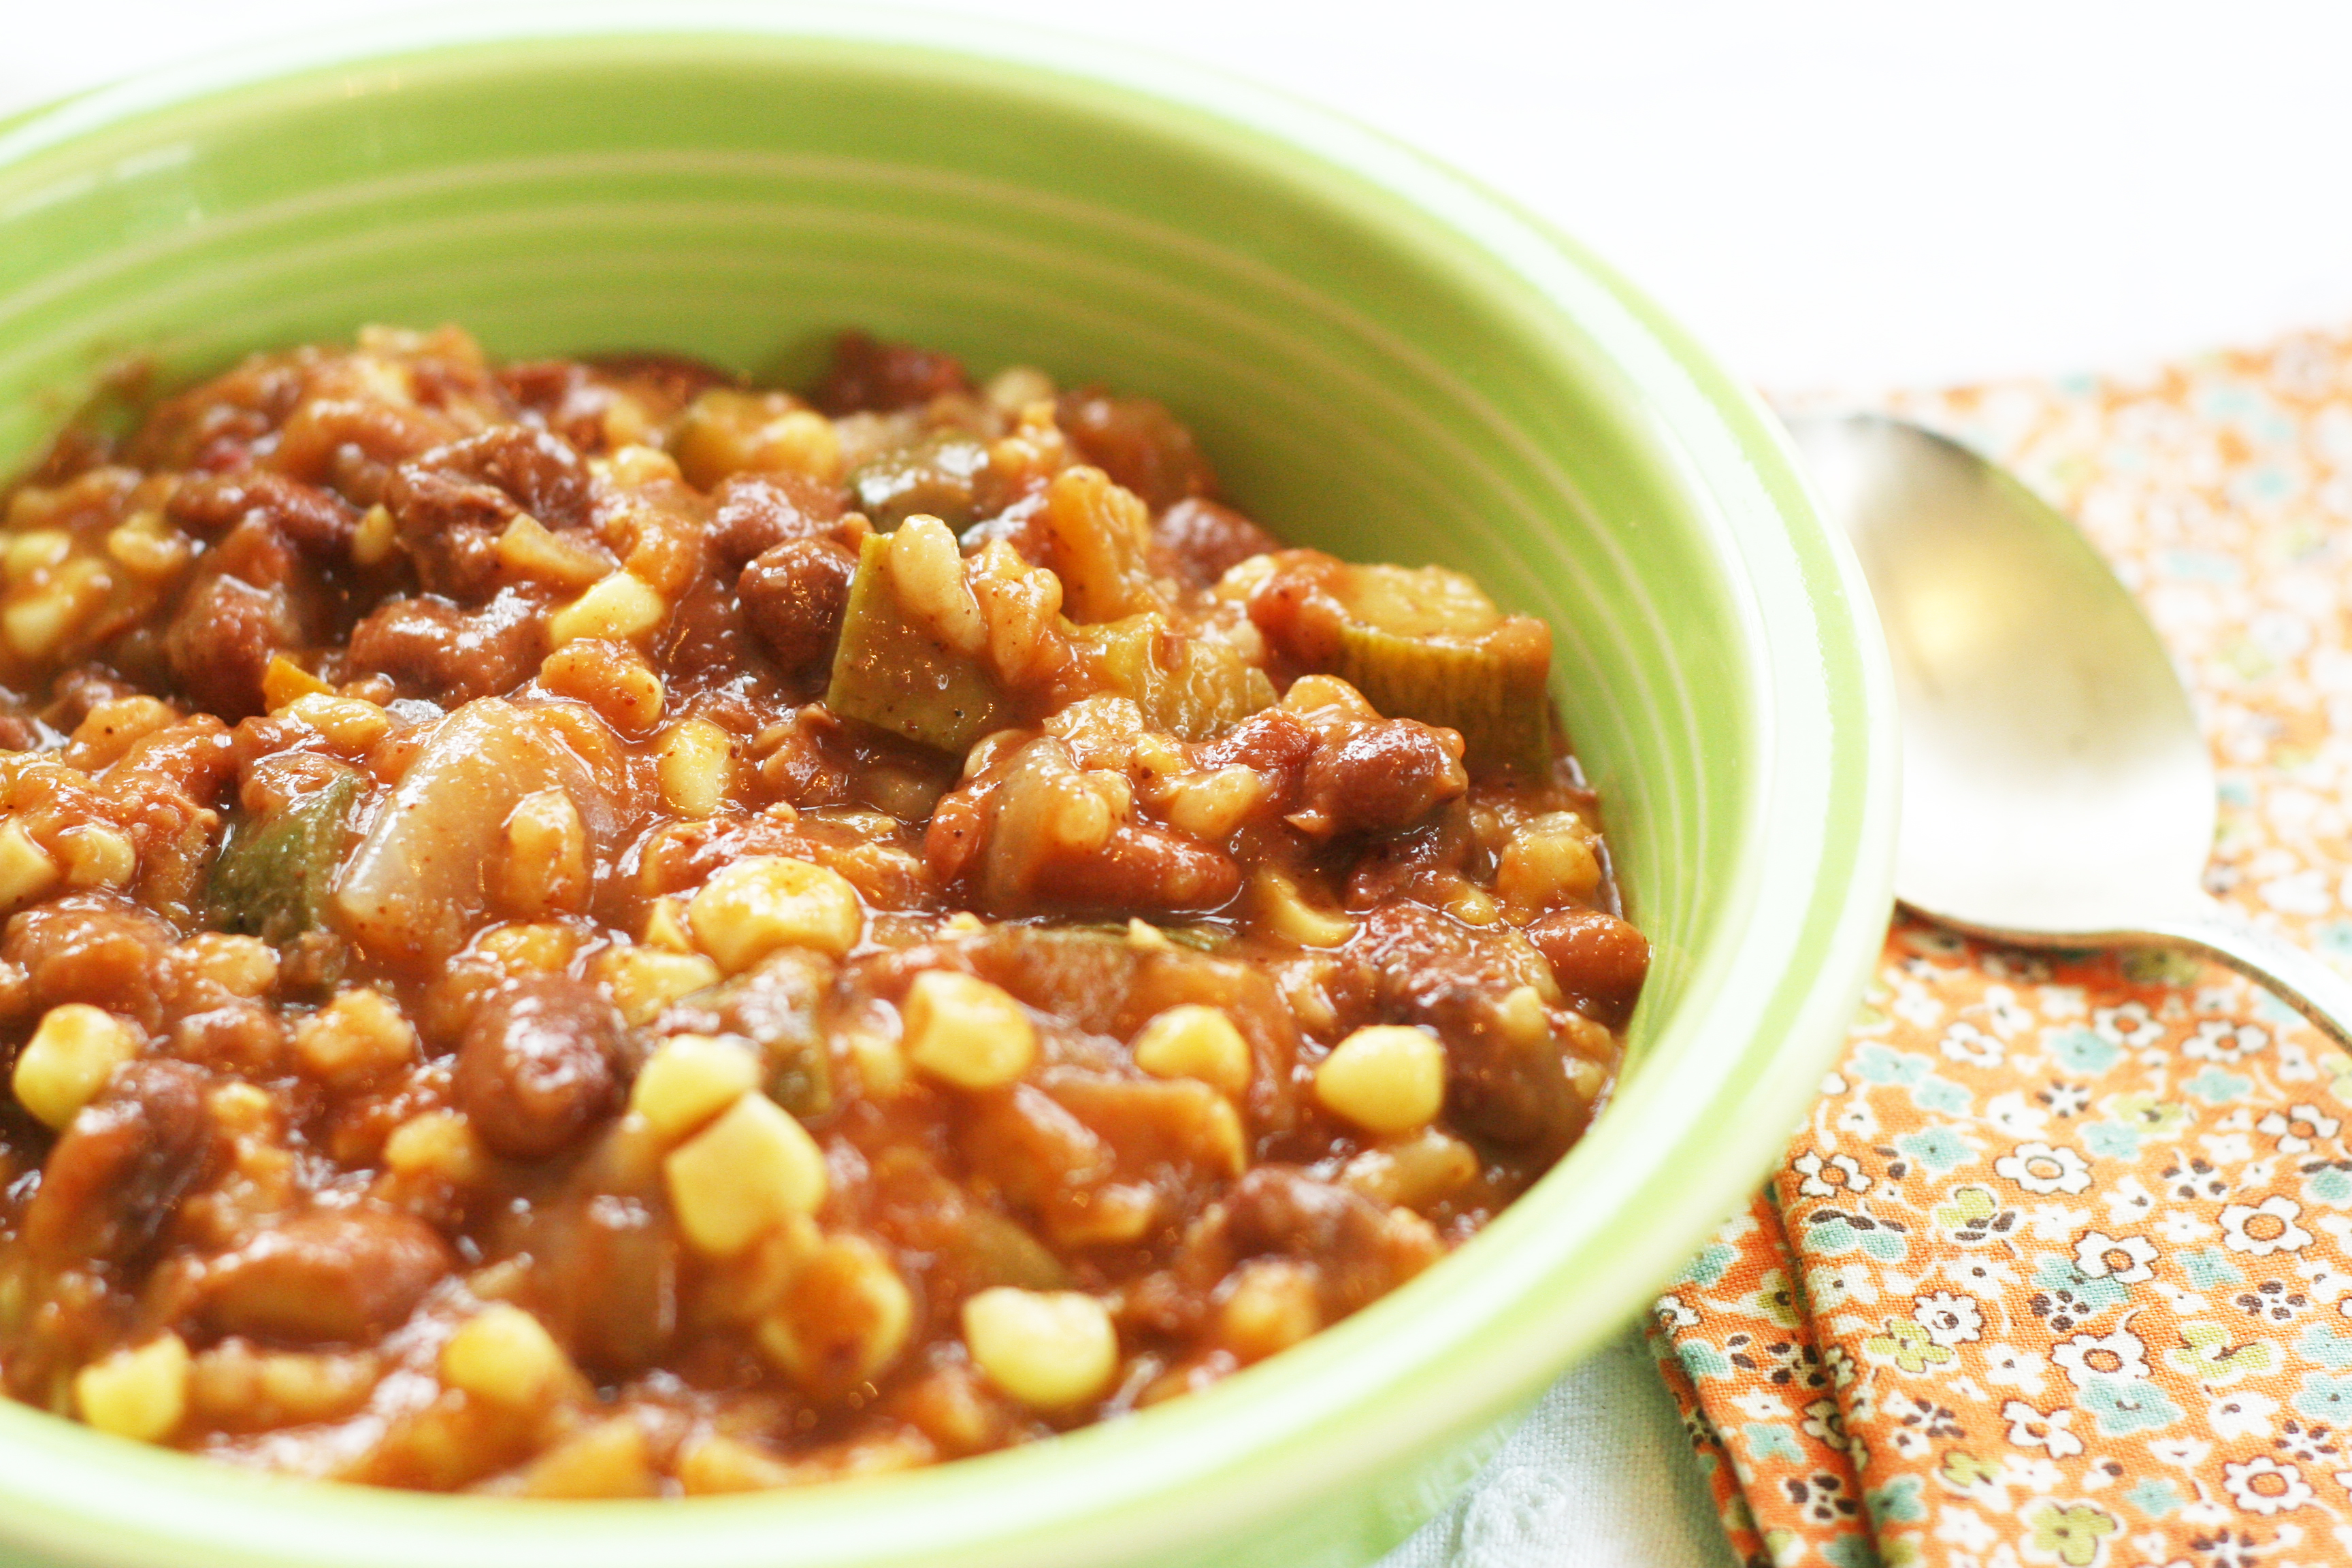 How to Make Great Vegetarian Chili Without a Recipe